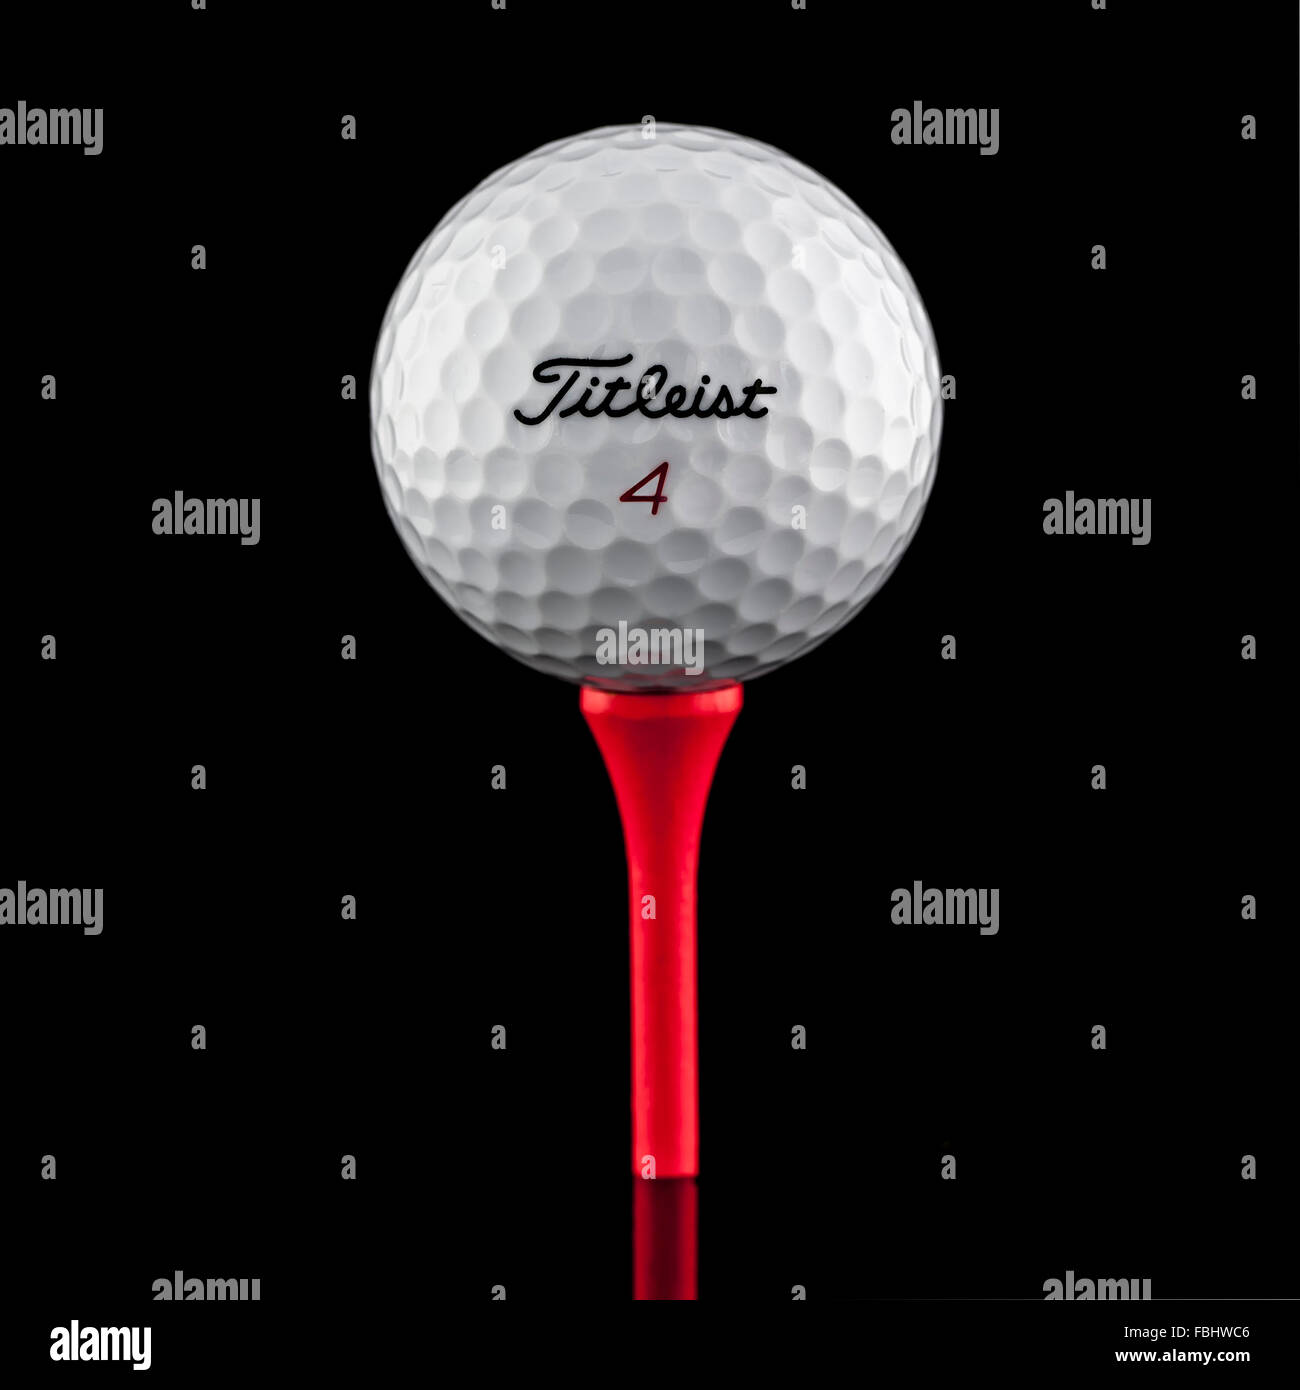 Titleist Golf Ball on a Red Tee over a black background Stock Photo